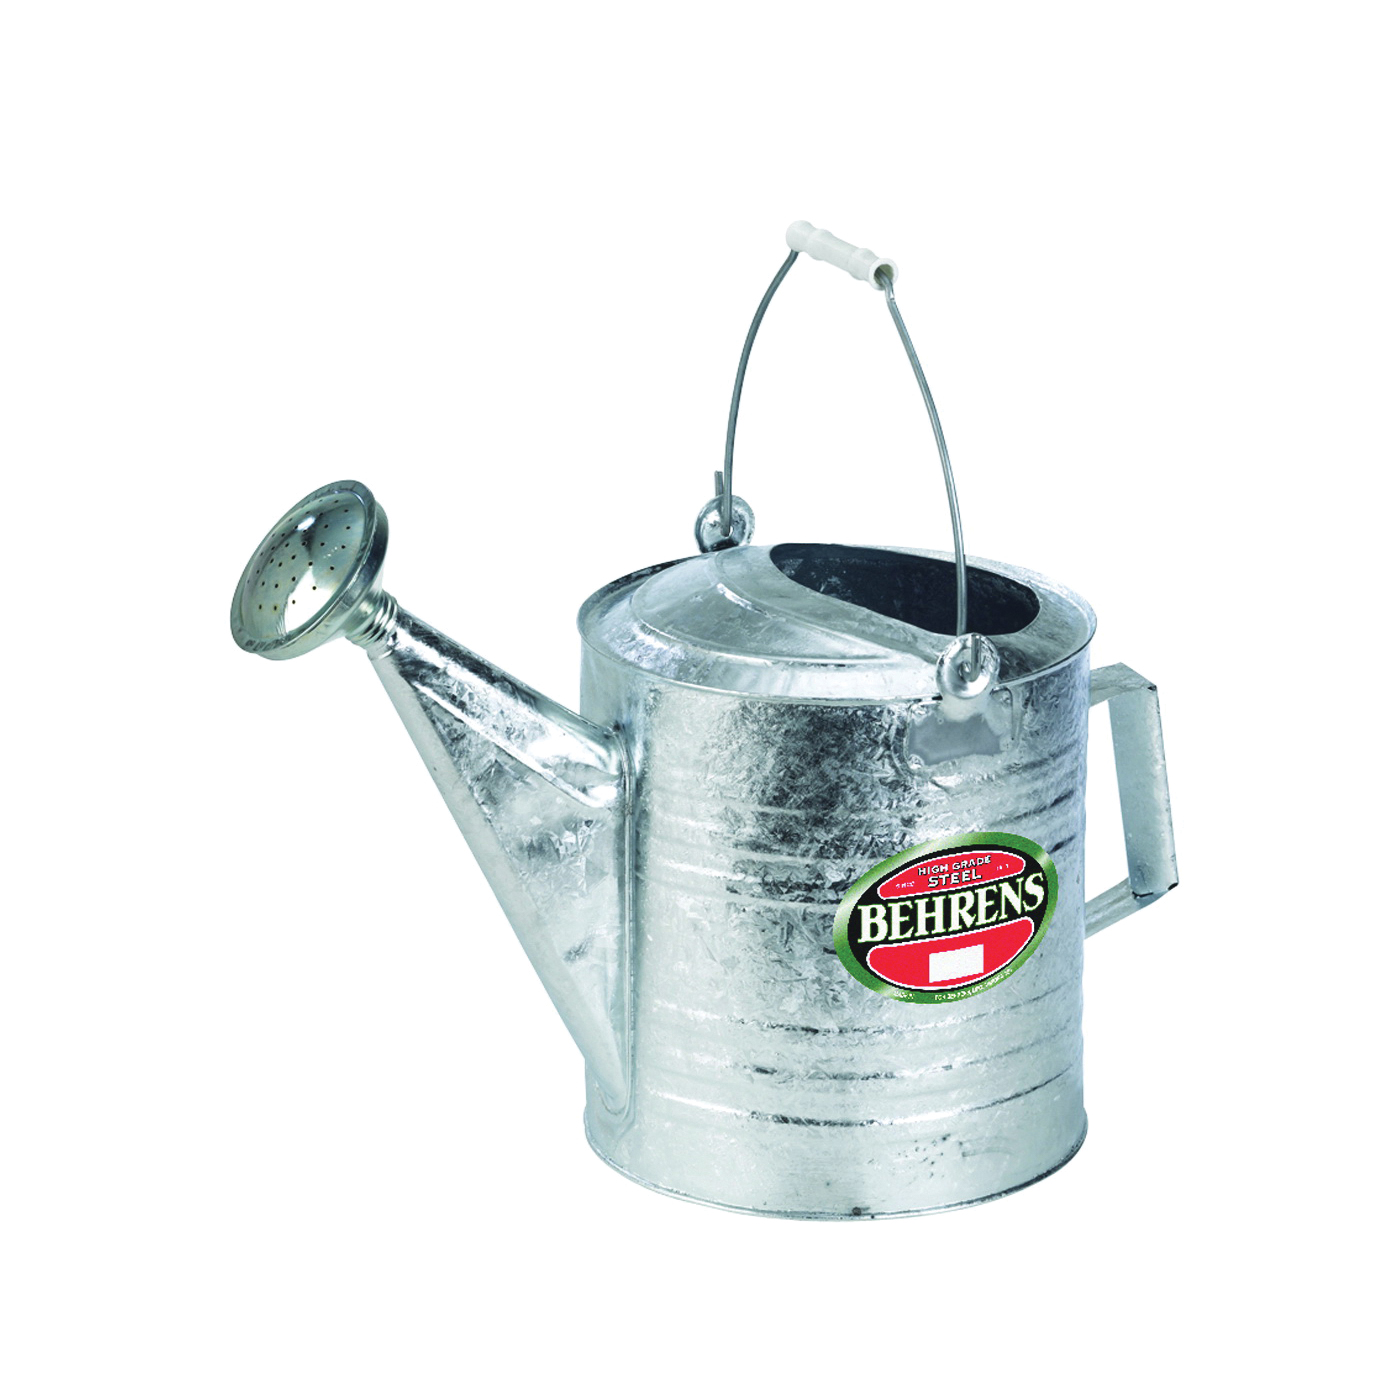 210 Watering Can, 2.5 gal Can, Steel